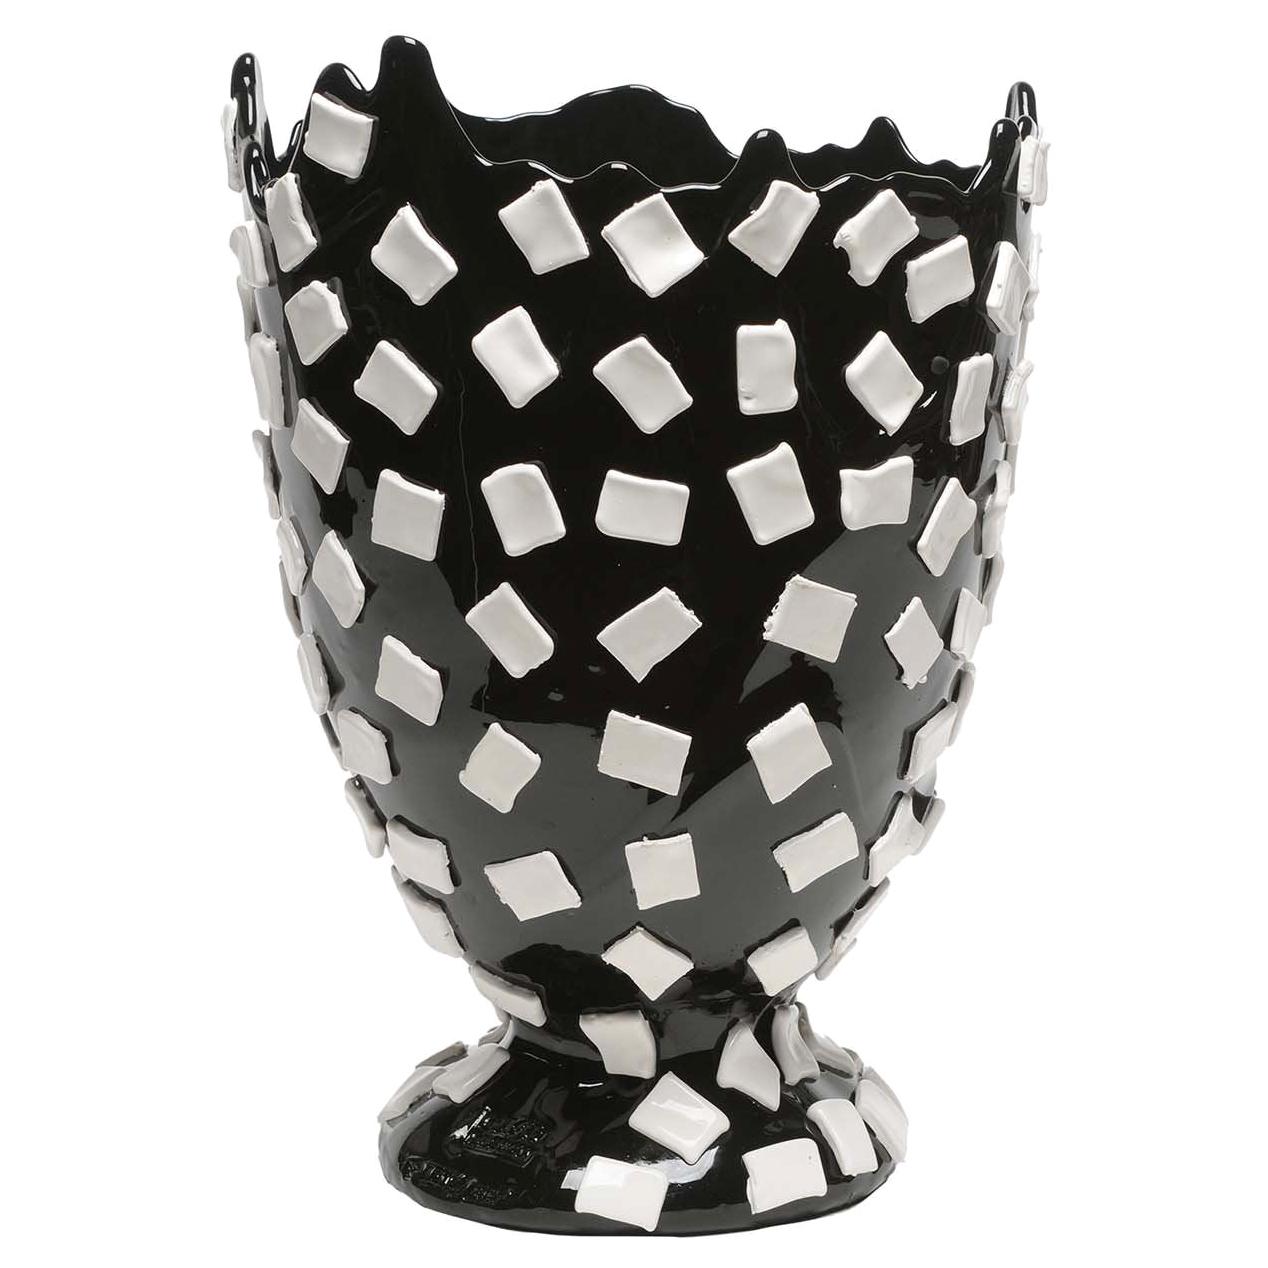 Rock Black and White Large Vase by Gaetano Pesce For Sale